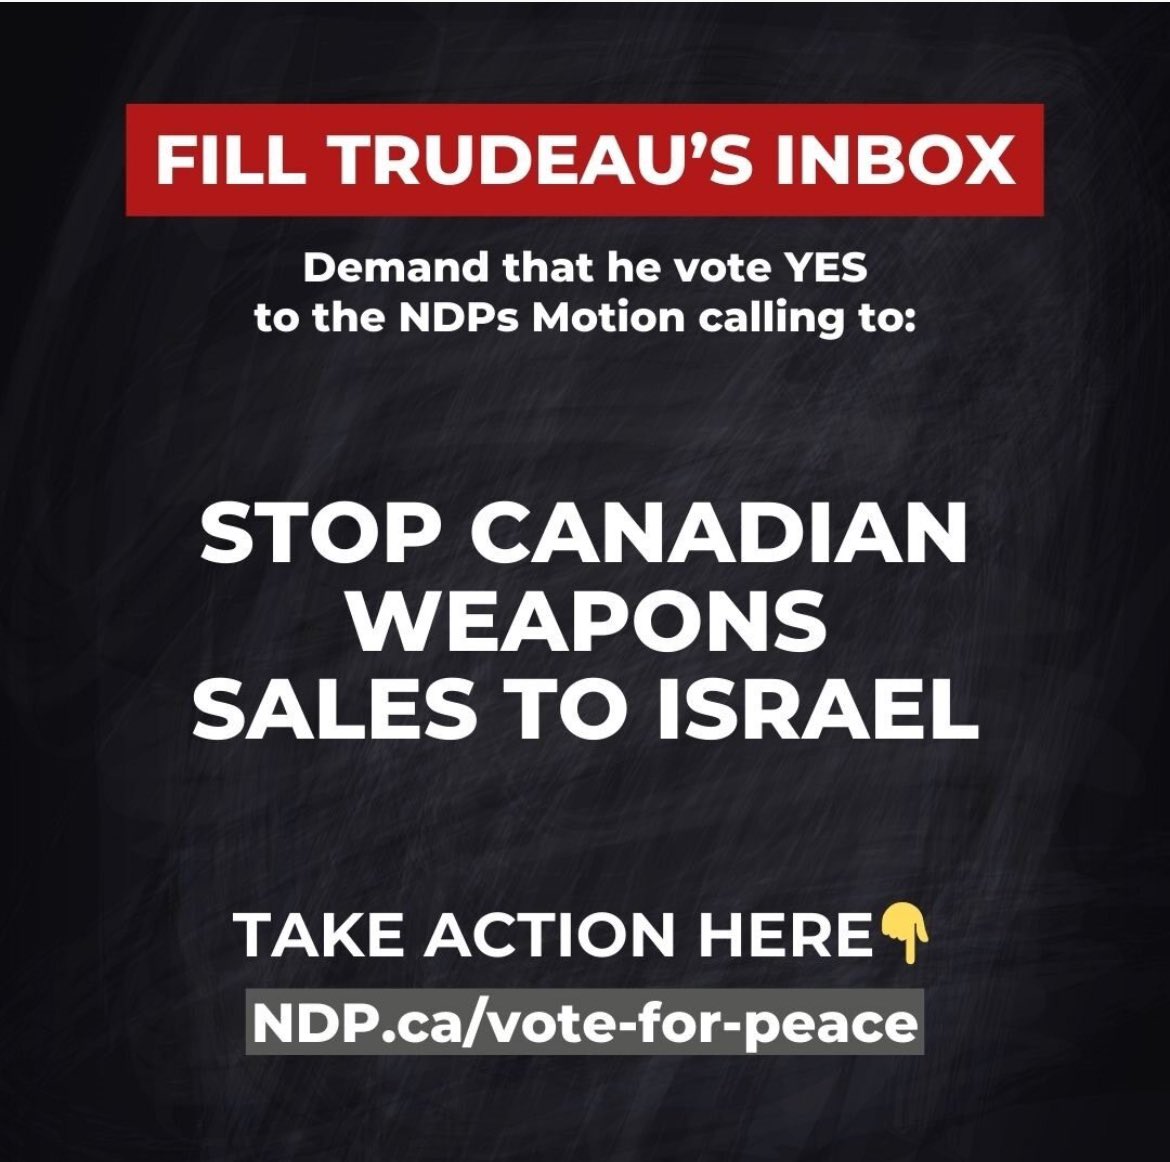 This weekend, don’t forget to tell Trudeau to stop supporting human rights abuses in Gaza #StopArmsSales #CeasefireNow